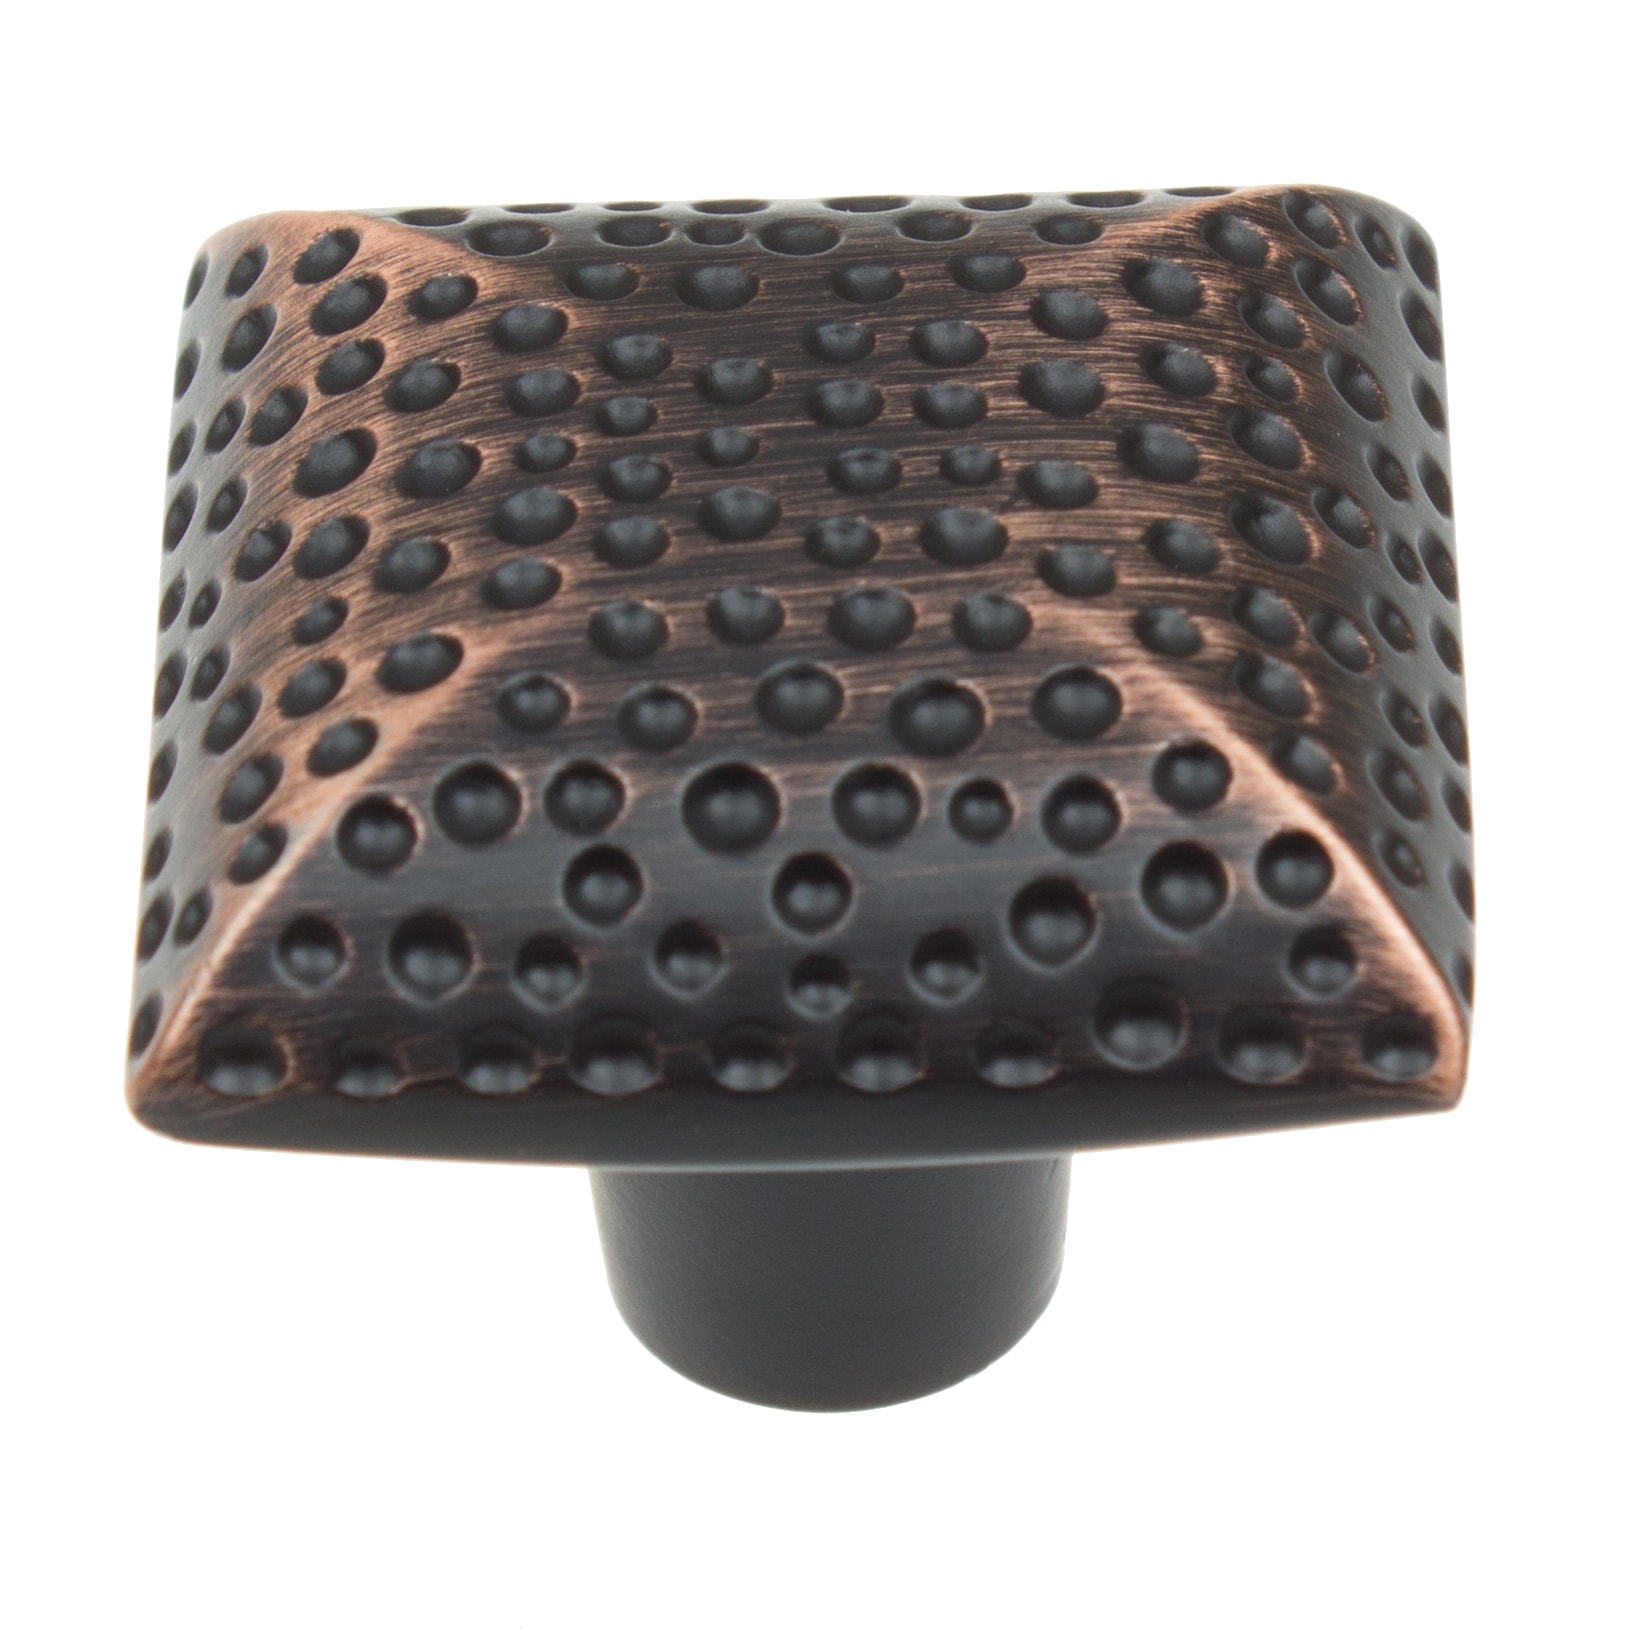 GlideRite 1-1/4 in. Dotted Hammered Transitional Square Cabinet Knobs, Oil Rubbed Bronze, Pack of 10 - image 1 of 5